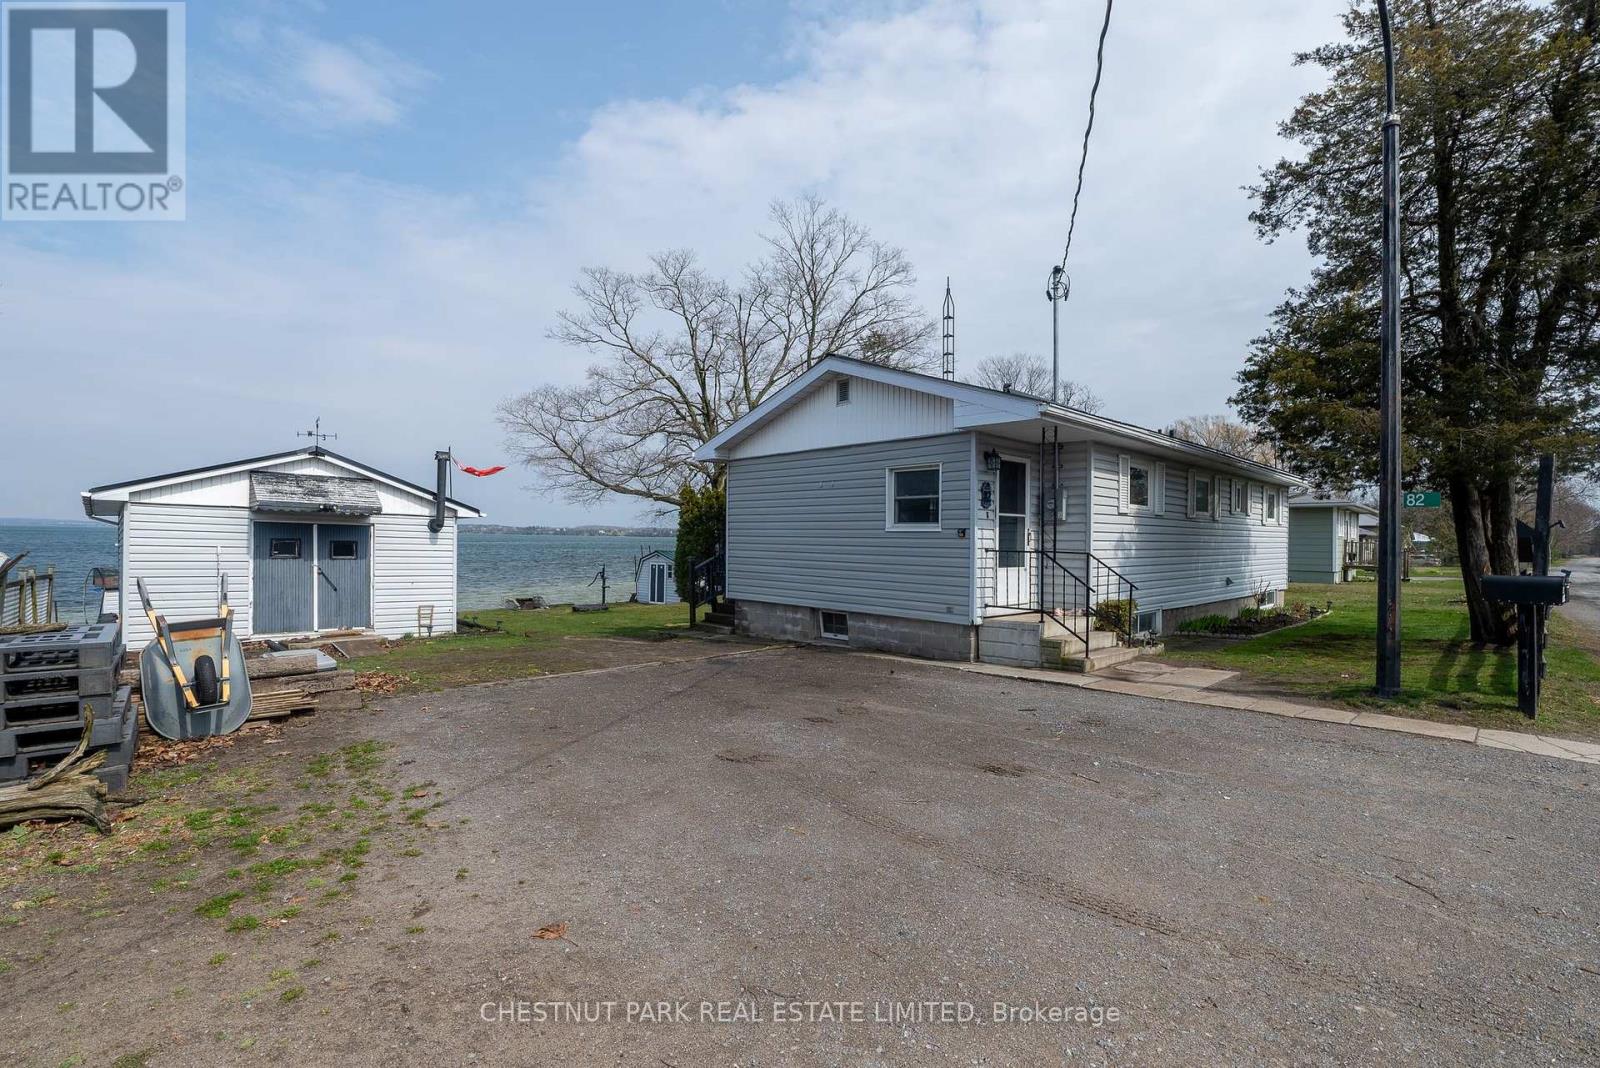 82 OUTLET ROAD, prince edward county, Ontario